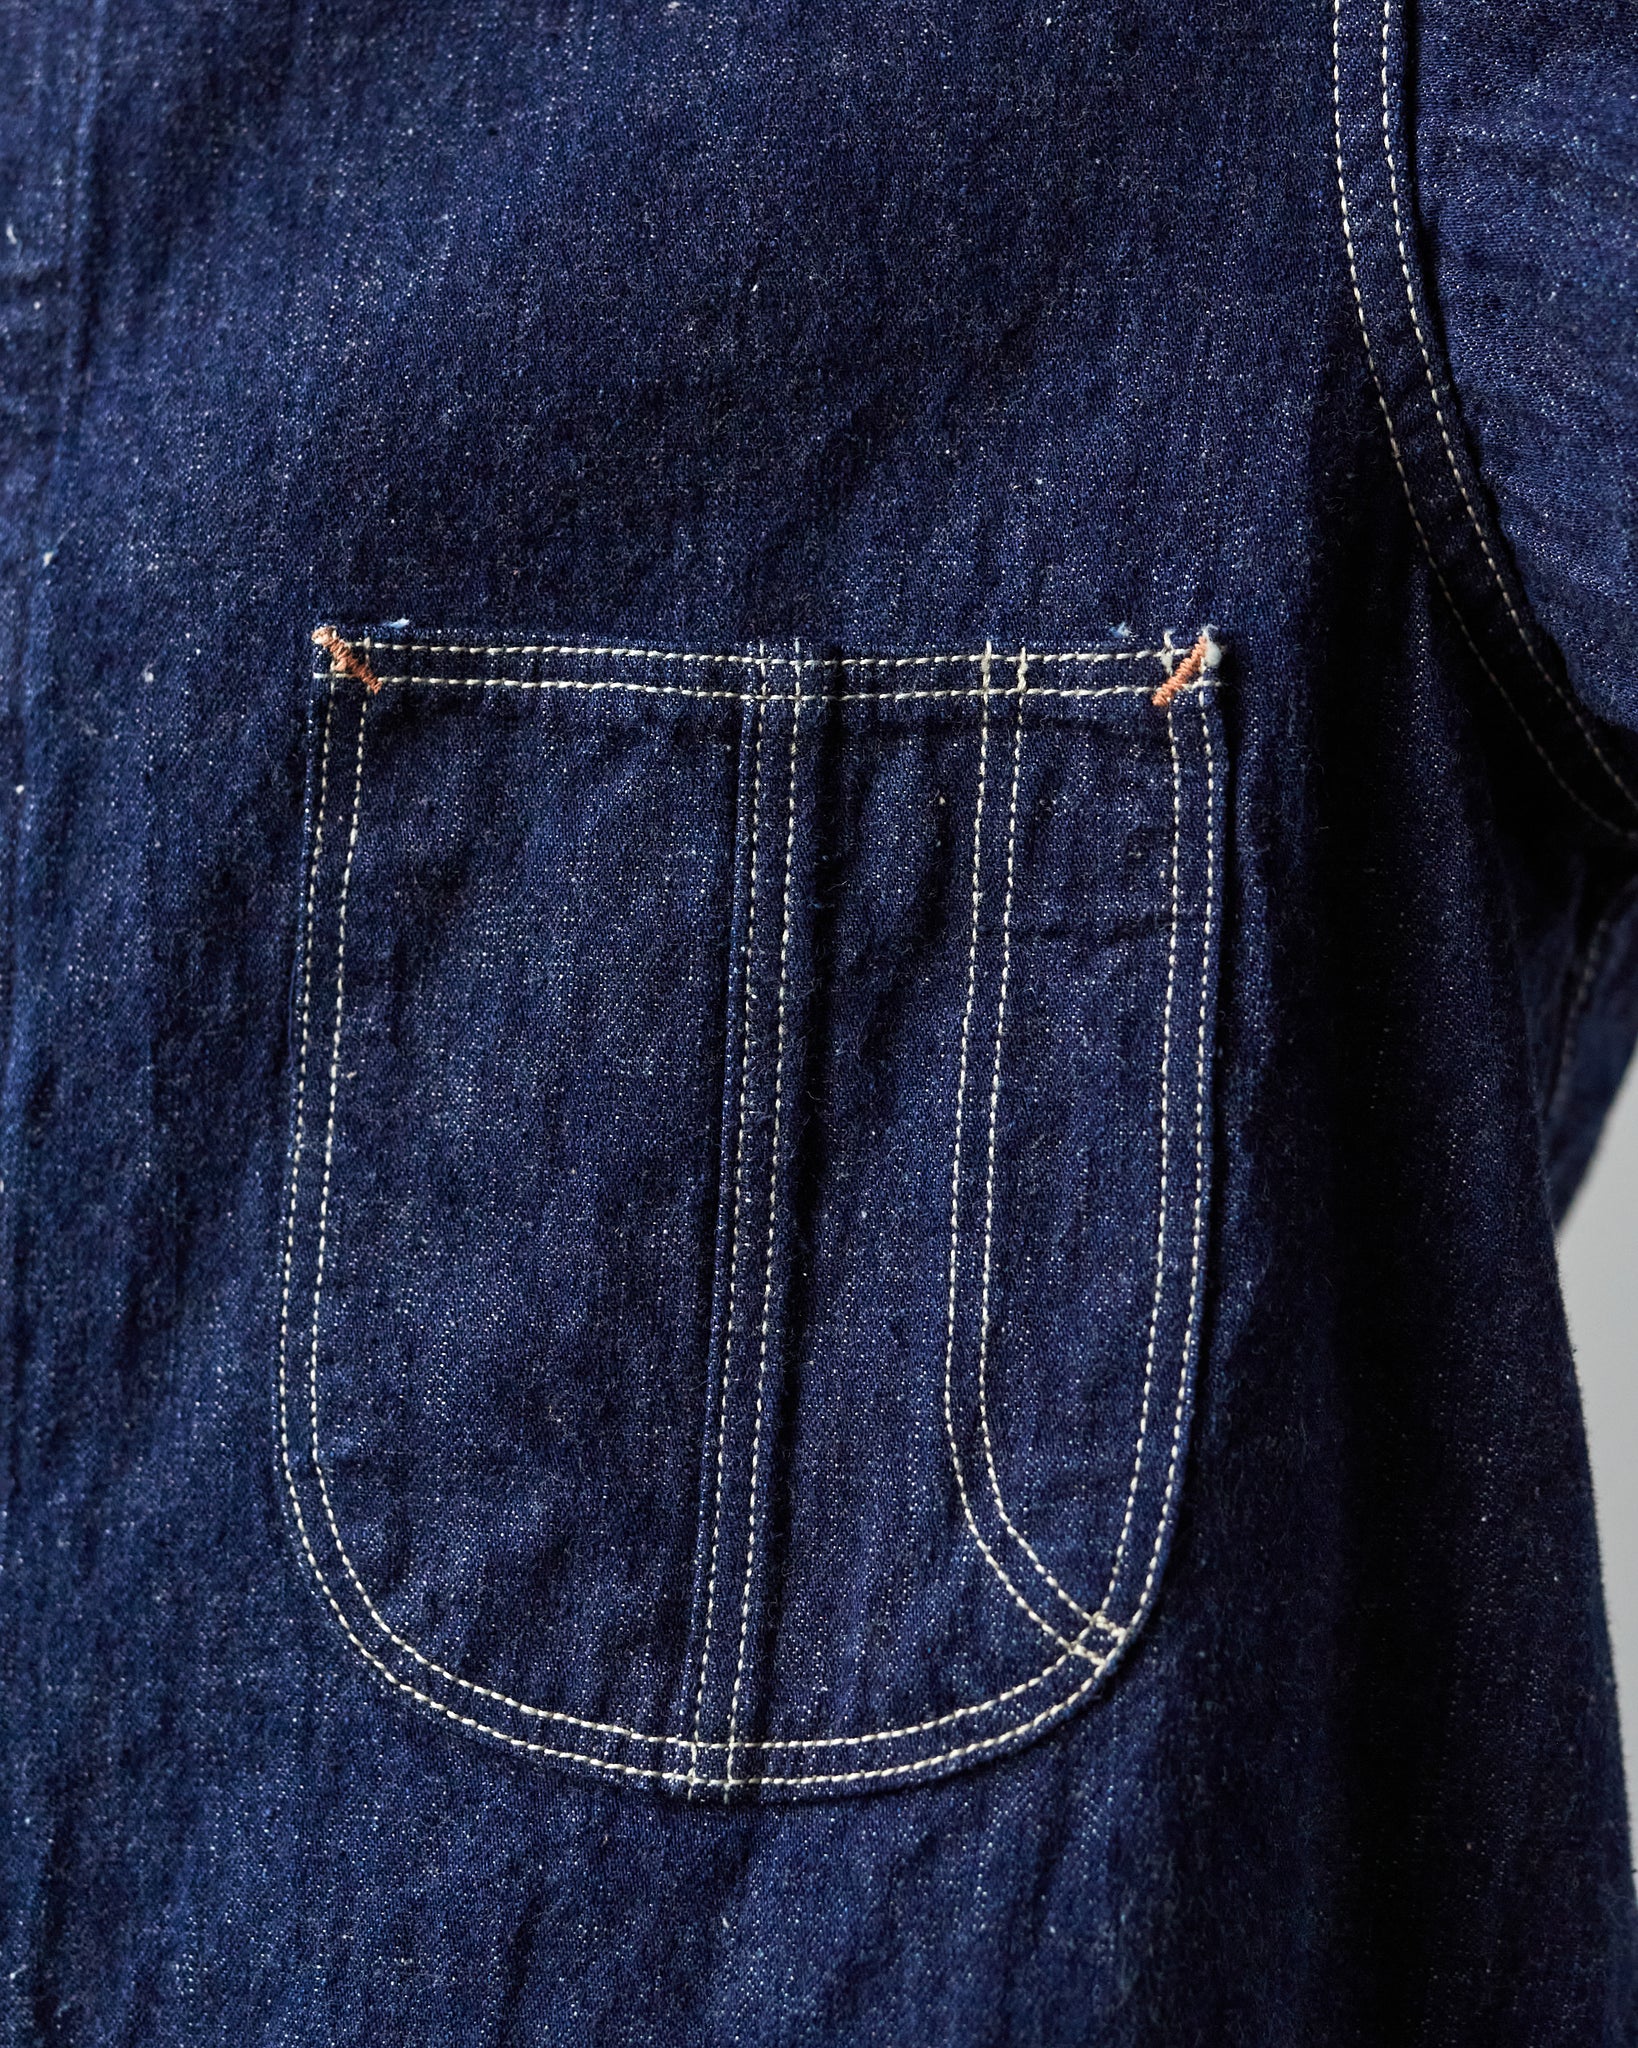 OrSlow 9oz Denim Coverall, One Wash